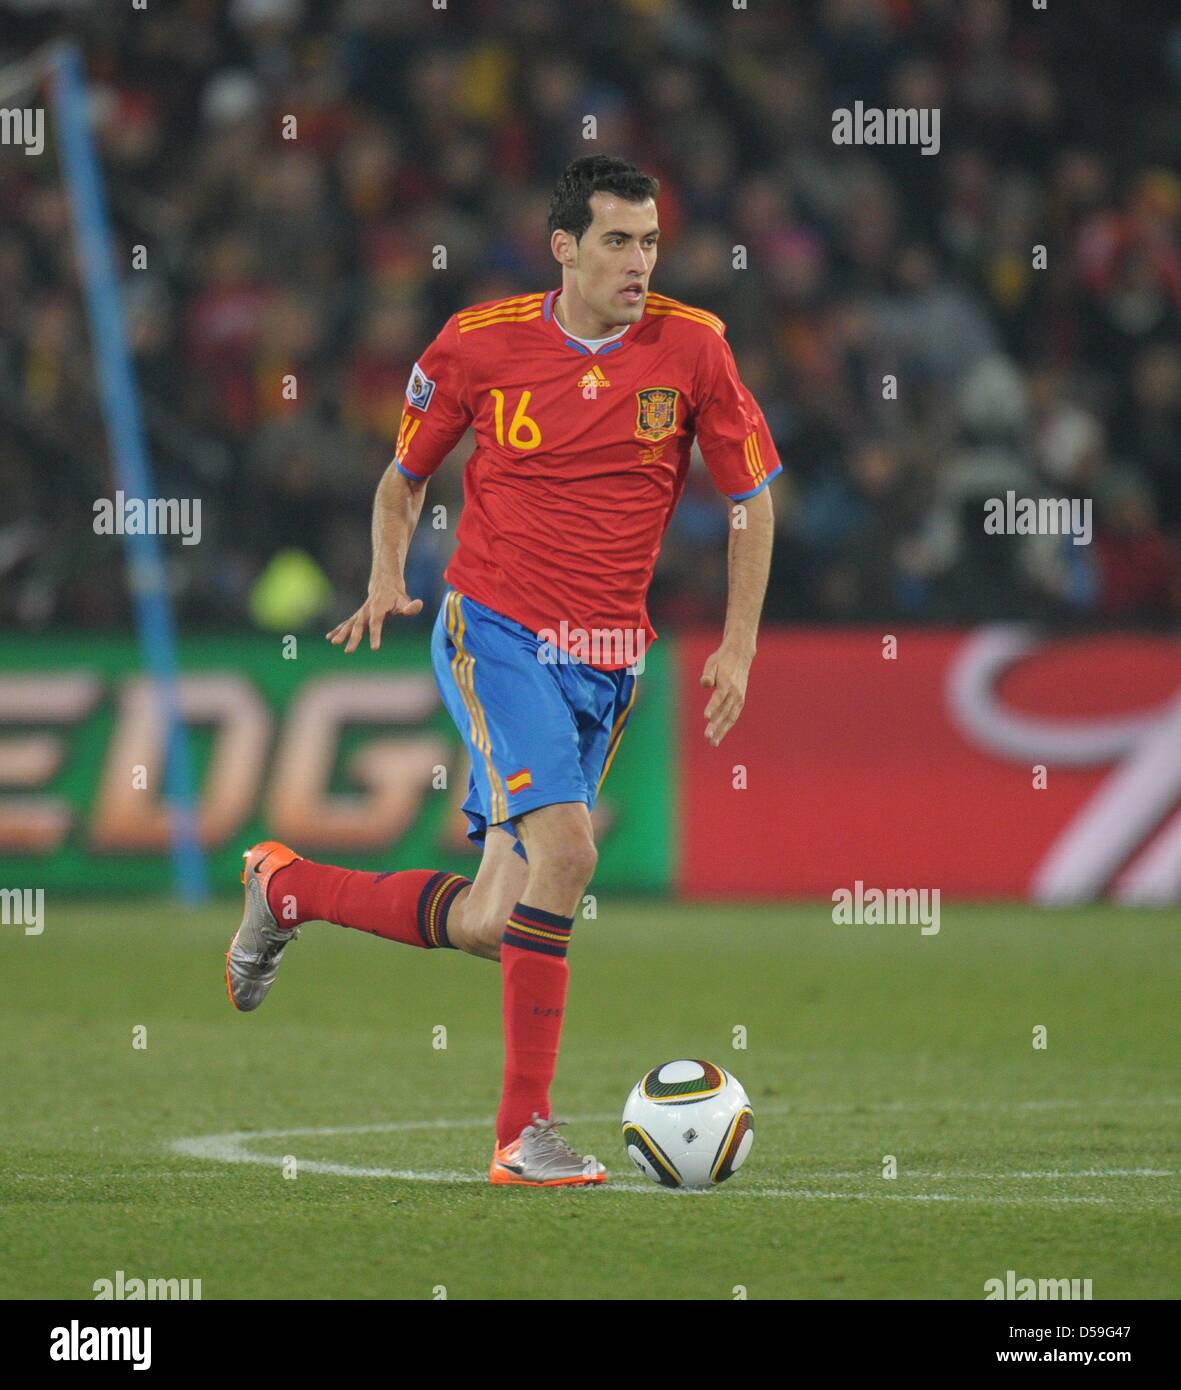 Sergio Busquets of Spain controls the ball during the FIFA World Cup 2010 group H match between Spain and Honduras at the Ellis Park Stadium in Johannesburg, South Africa 21 June 2010. Photo: Ronald Wittek dpa - Please refer to http://dpaq.de/FIFA-WM2010-TC Stock Photo